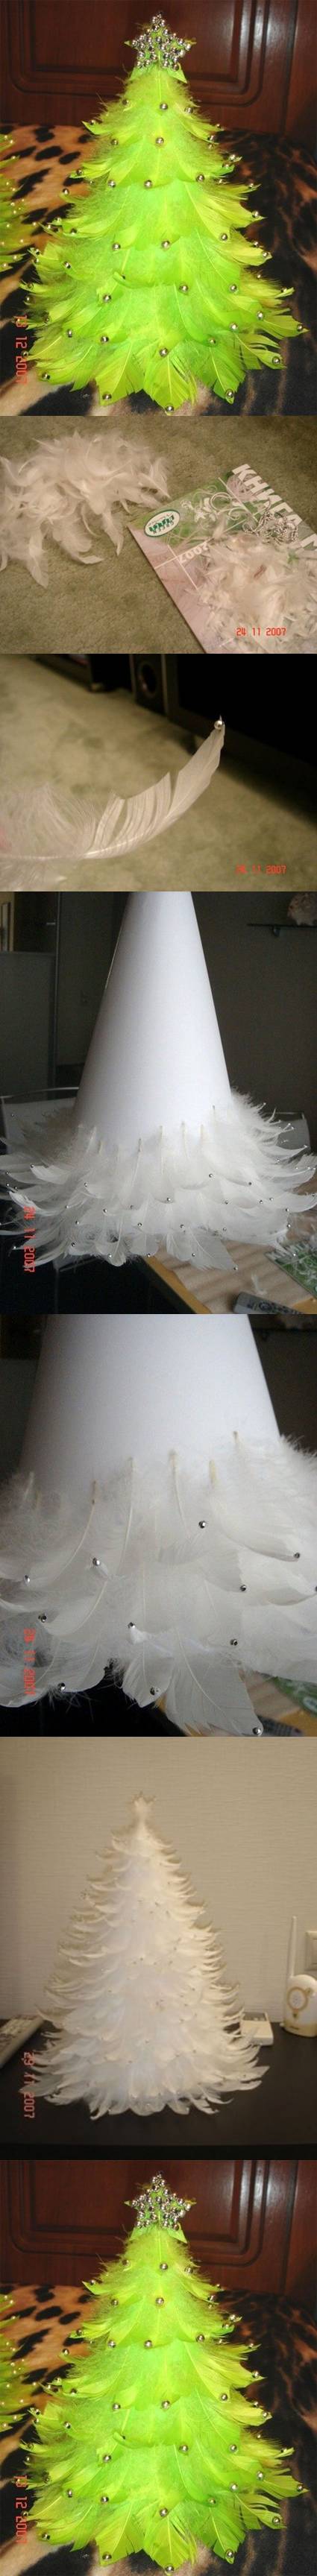 DIY Christmas Tree out of Feathers